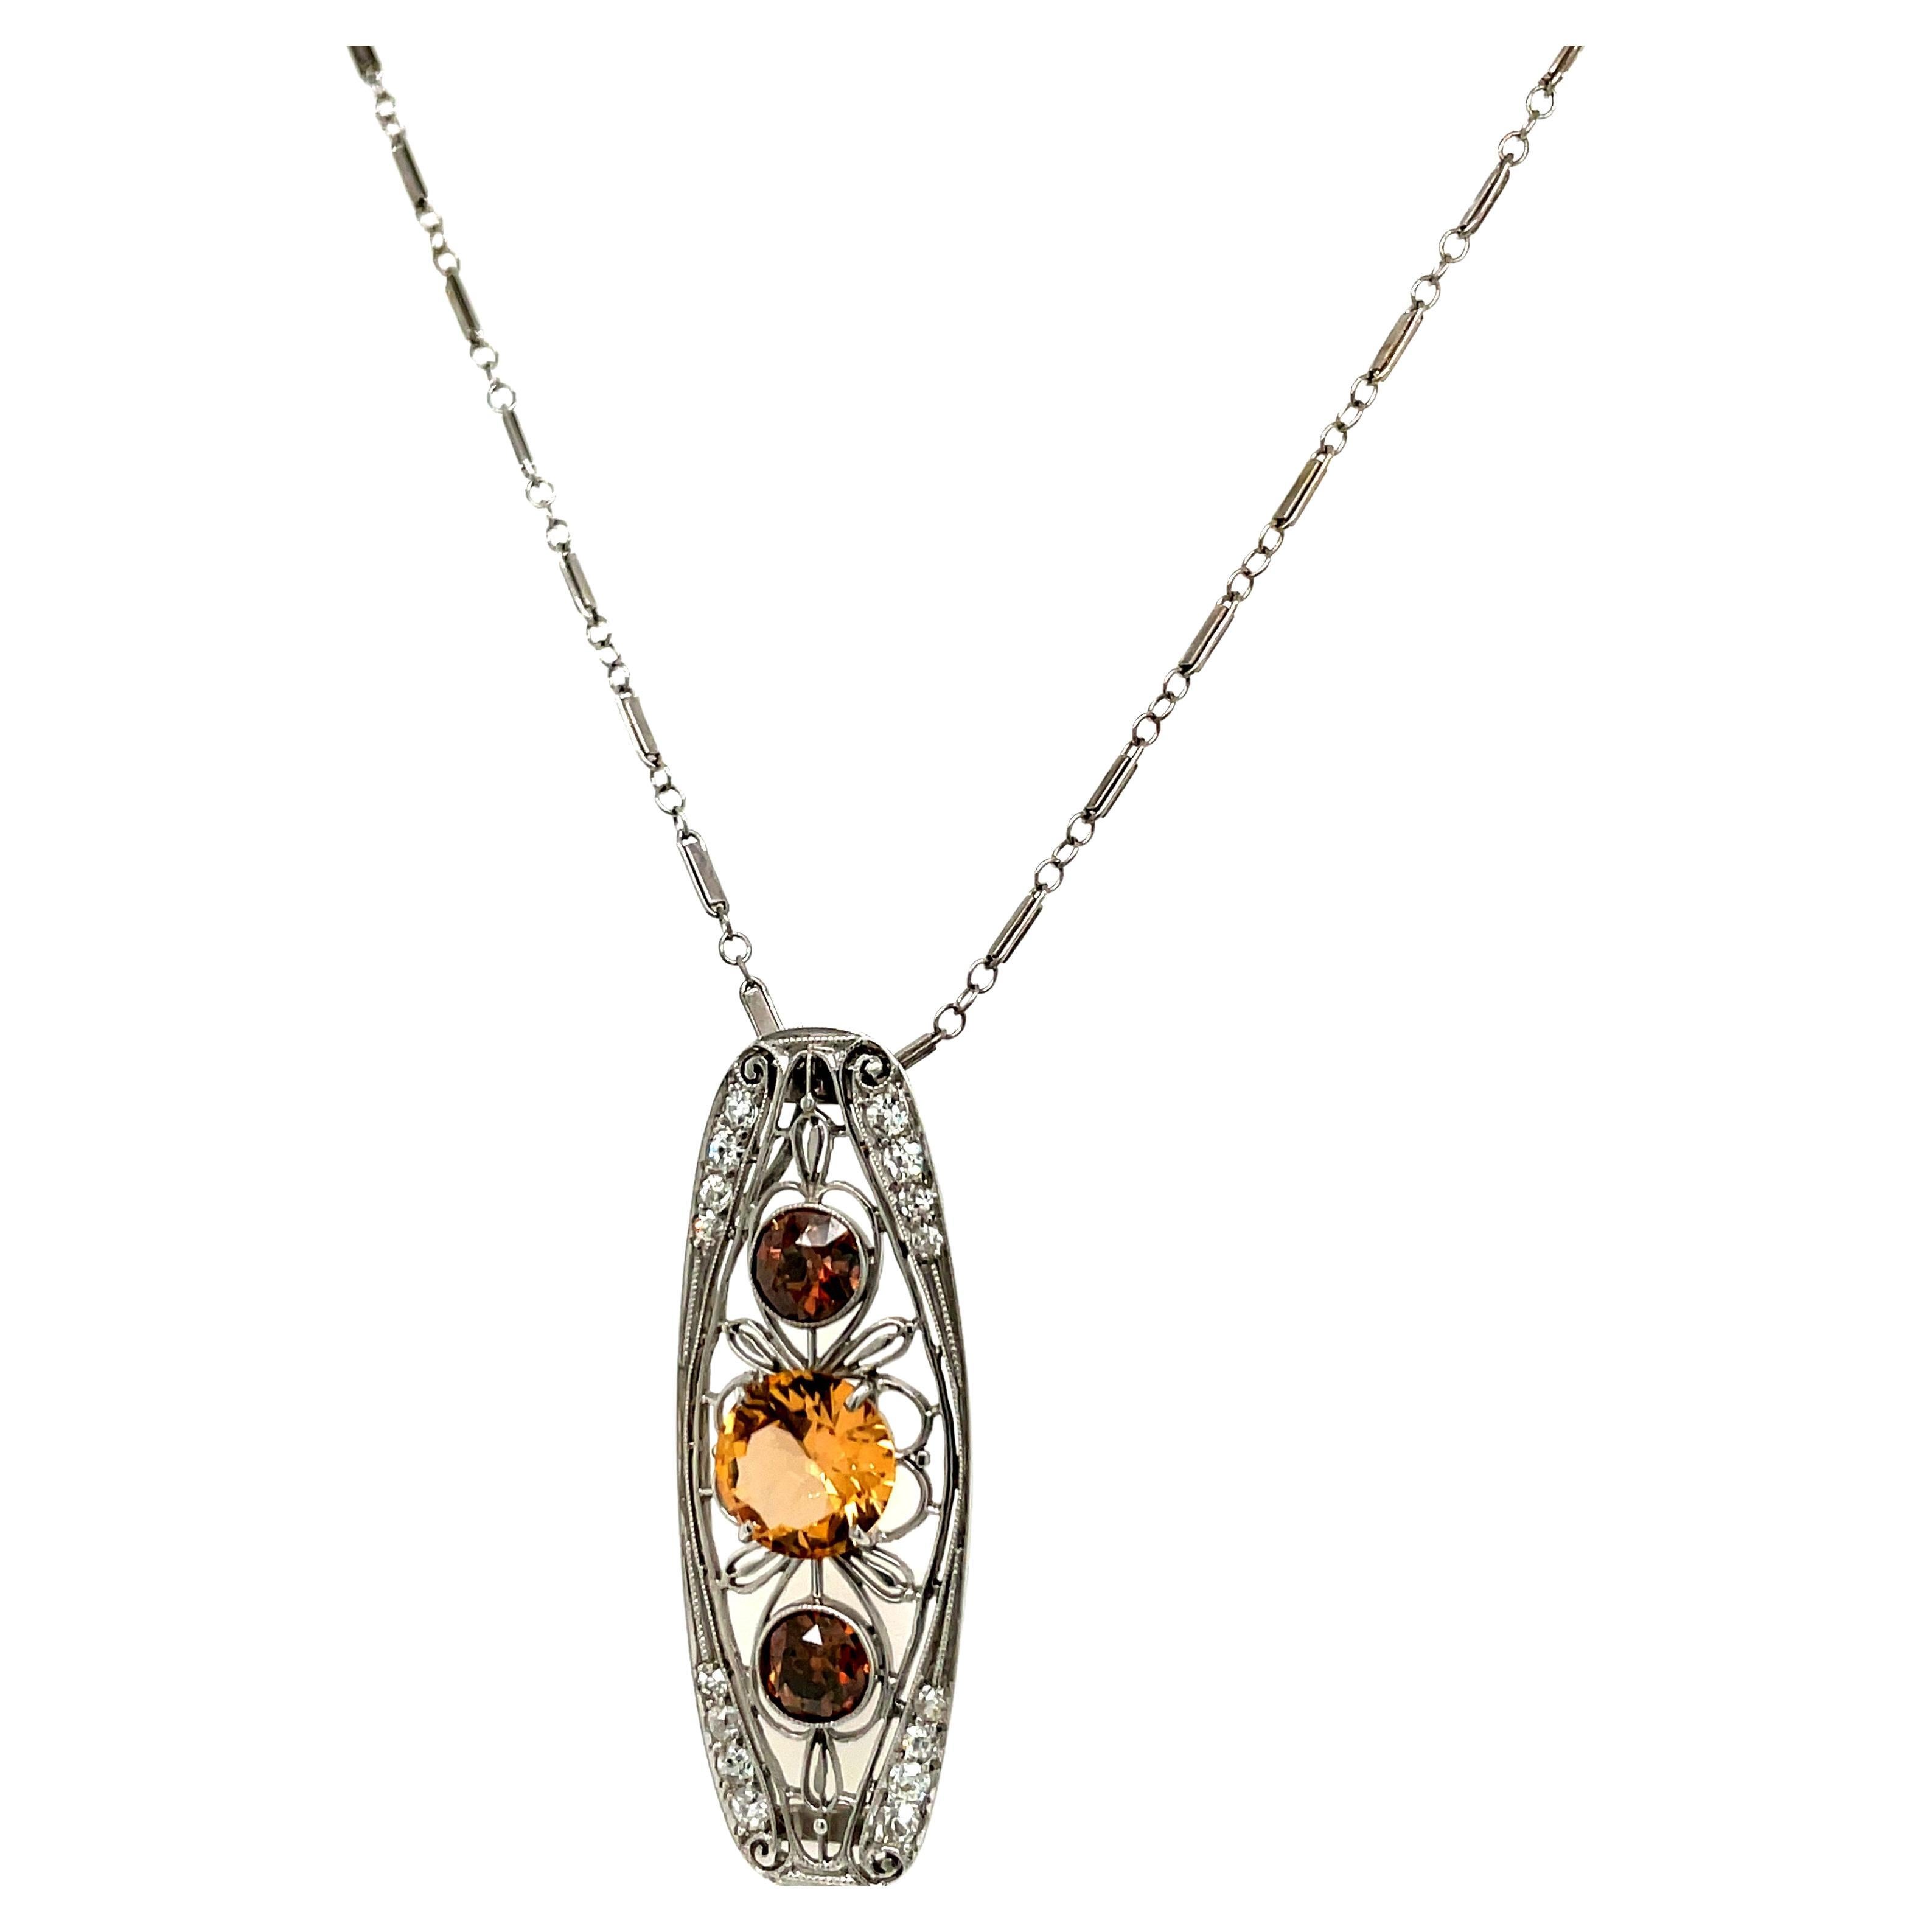 This exquisite vintage pendant is a true masterpiece of intricate artistry and rare gemstone beauty. Rendered in lustrous platinum with delicate filigree detailing, it showcases an exceptional combination of a golden-hued precious topaz and warm,